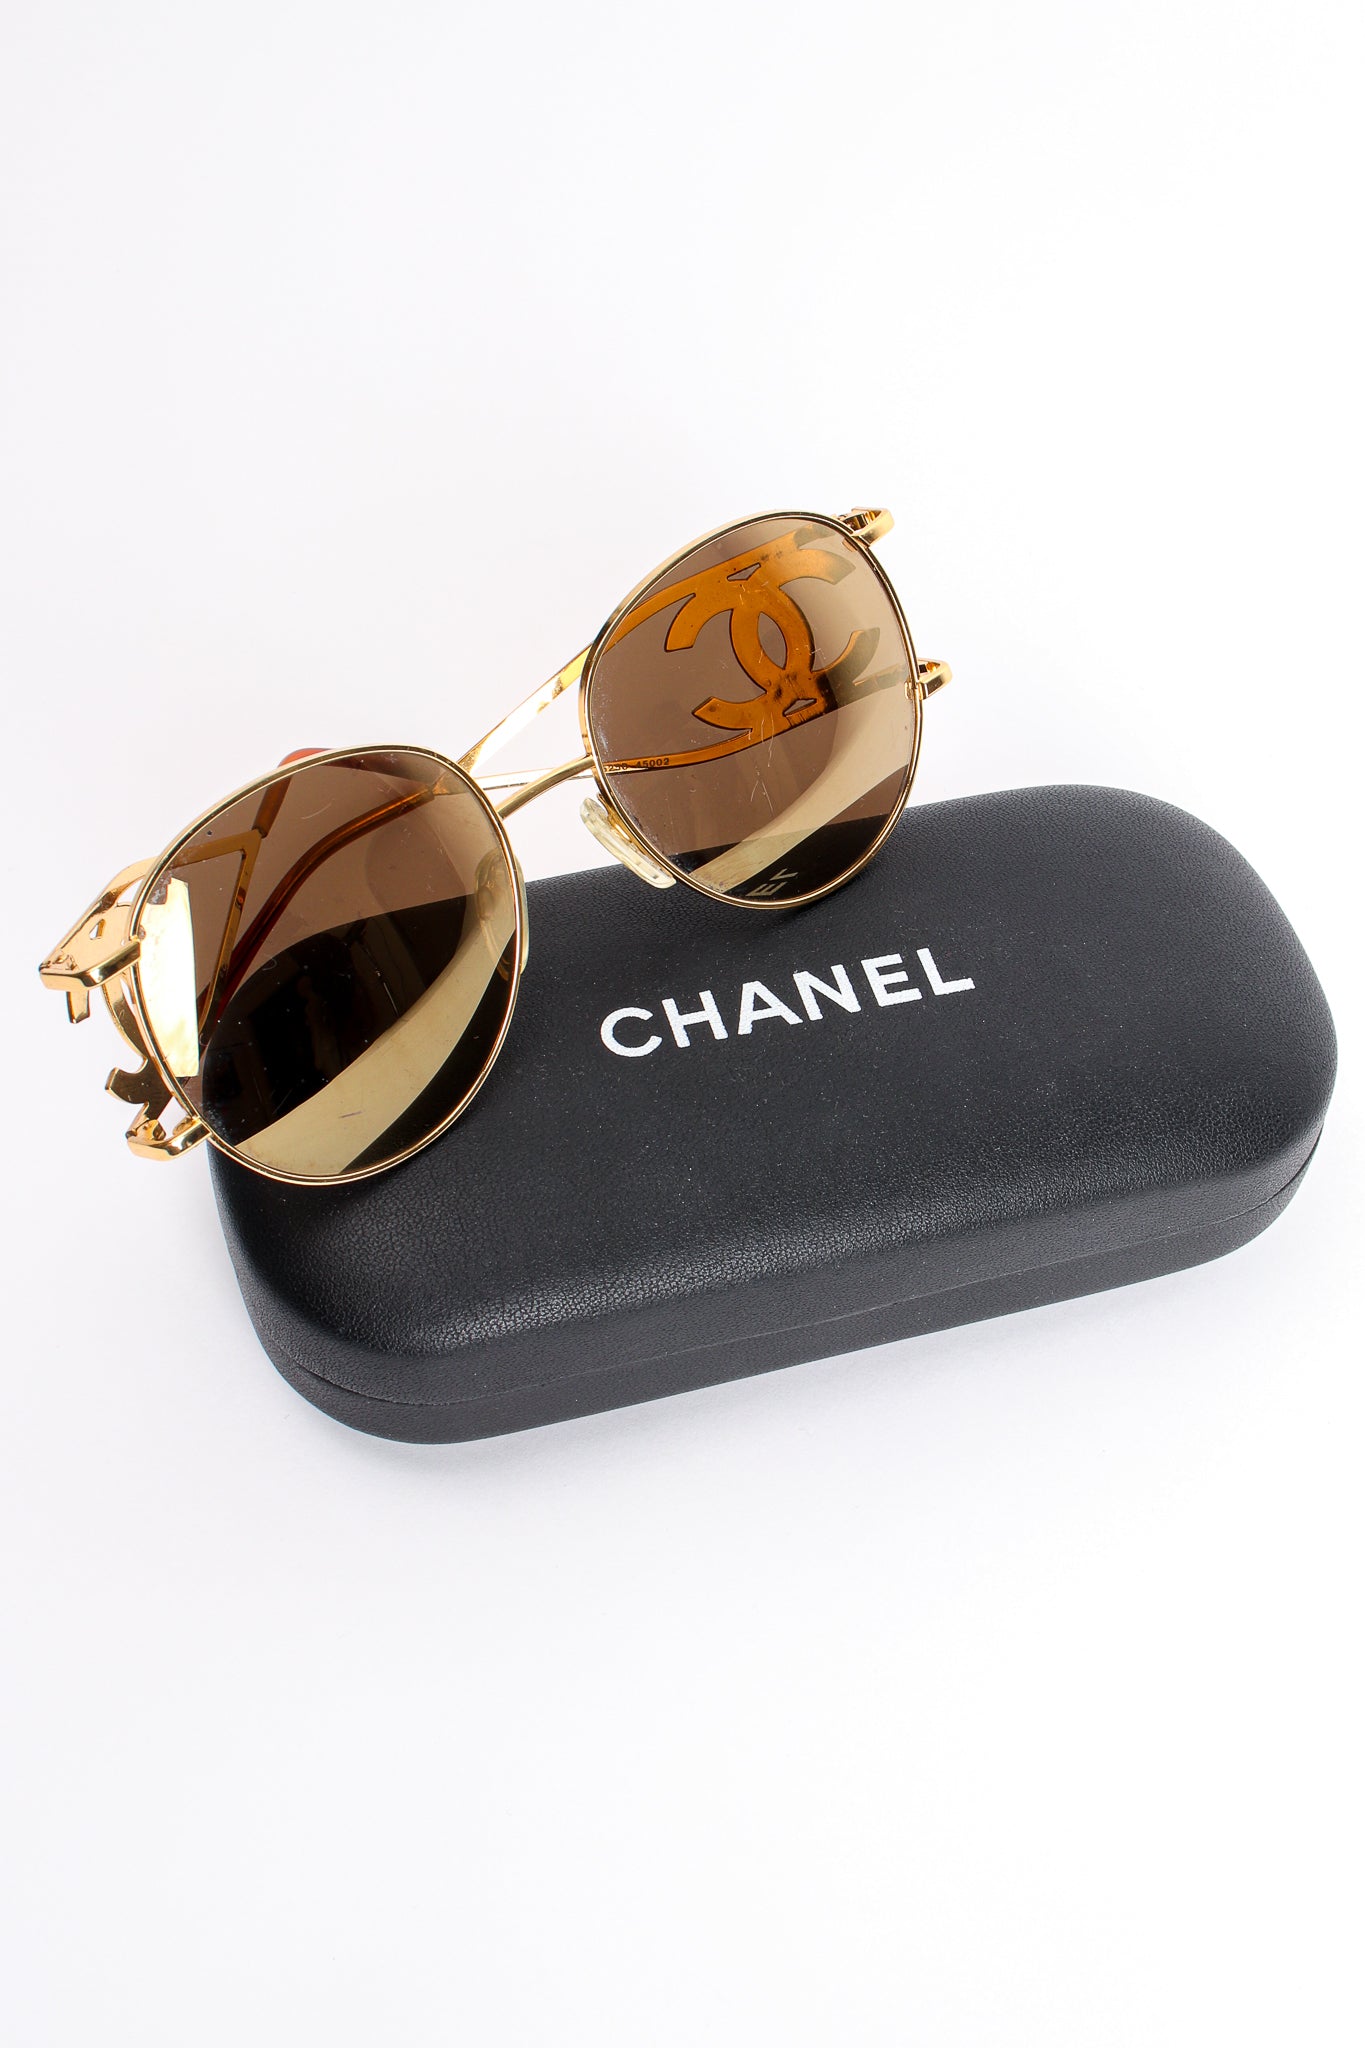 chanel sunglasses with logo on side box